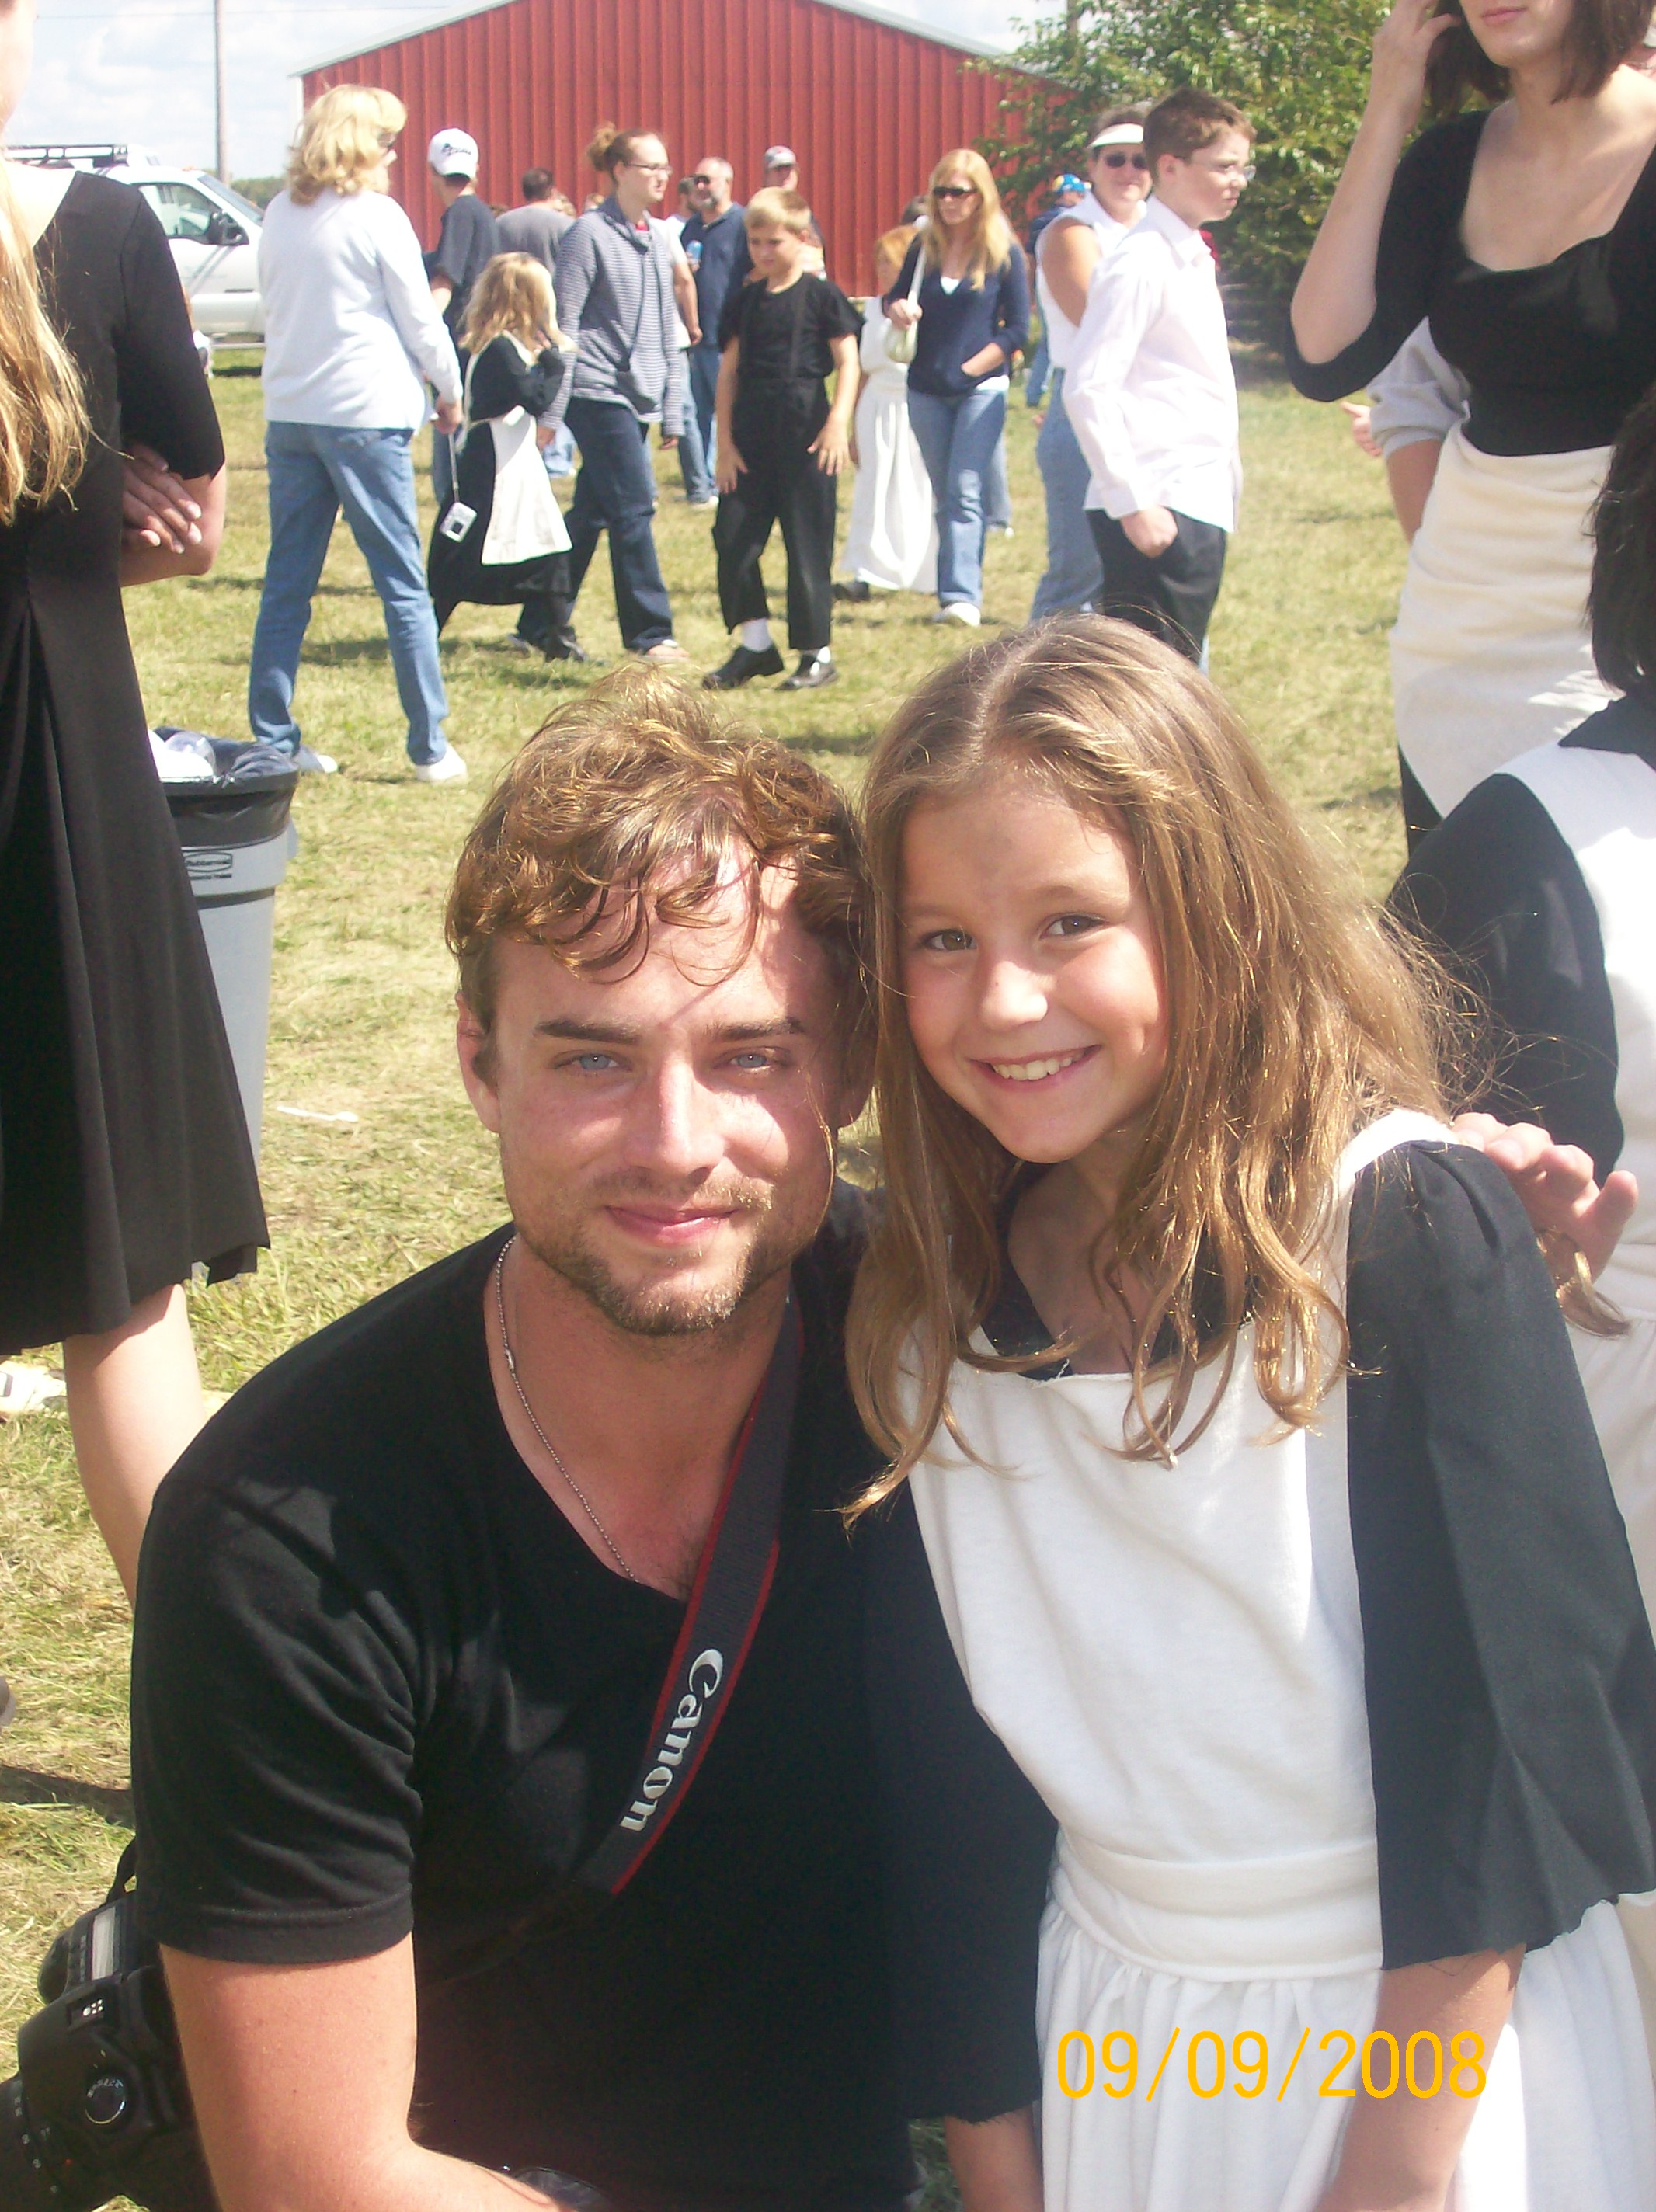 Ben Easter and Rylie on the set of Children of the Corn